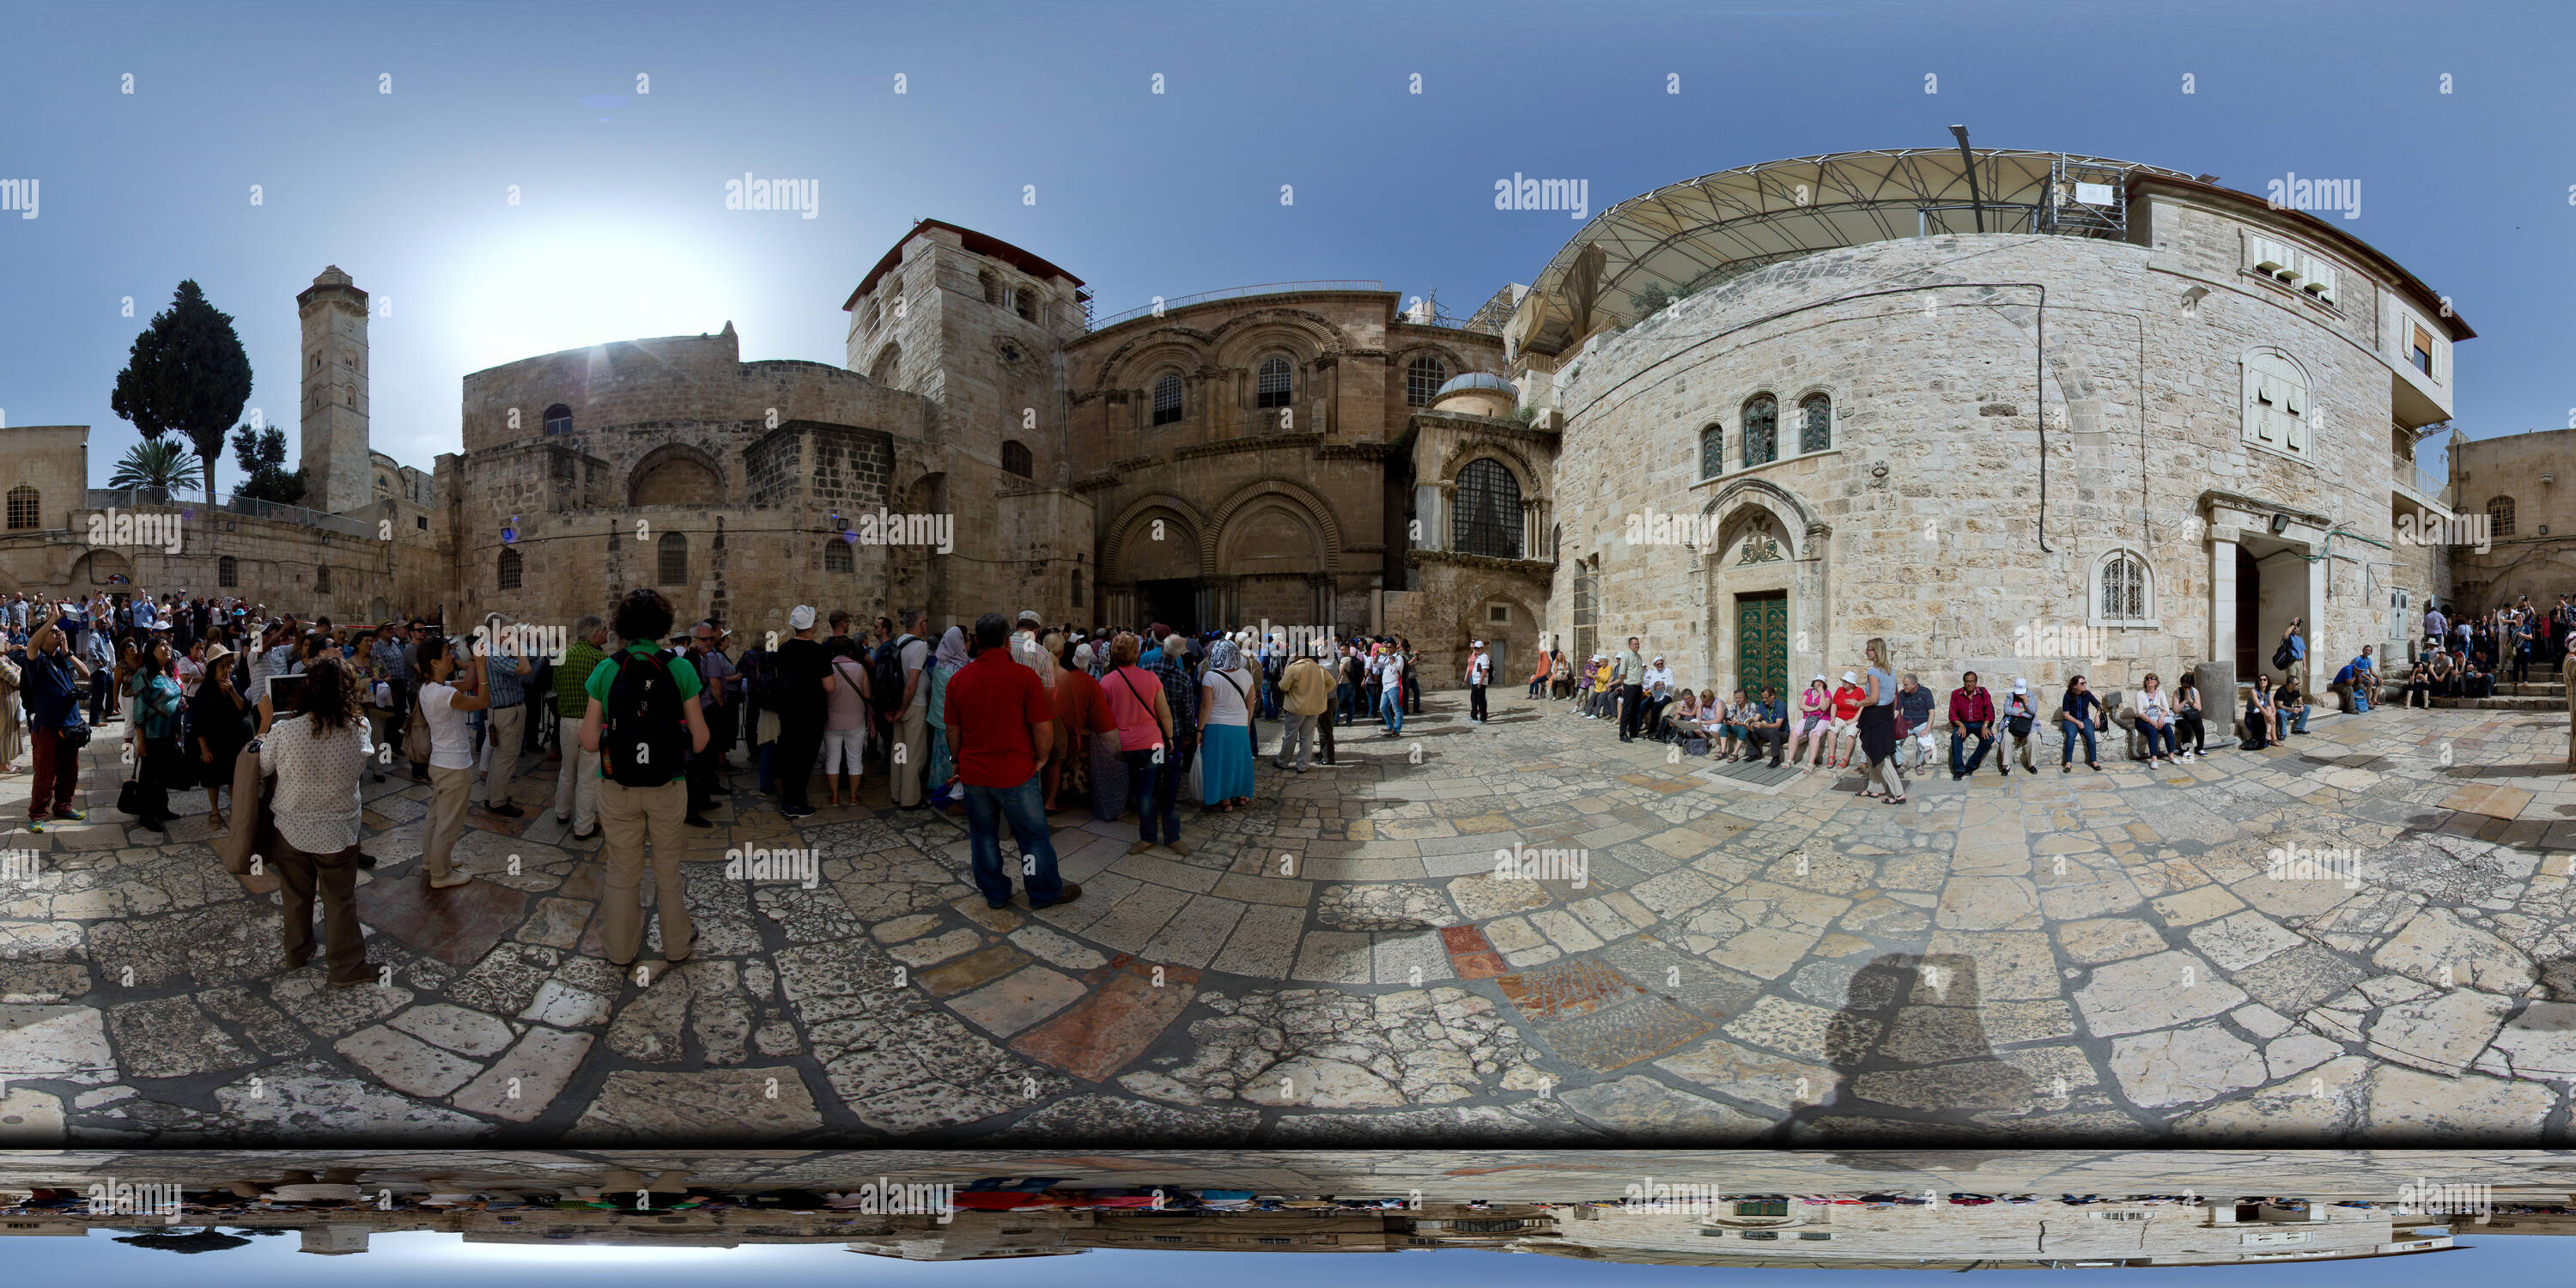 360 degree panoramic view of Church of the holy sepulchre, Jerusalem, 2016-04, freehand